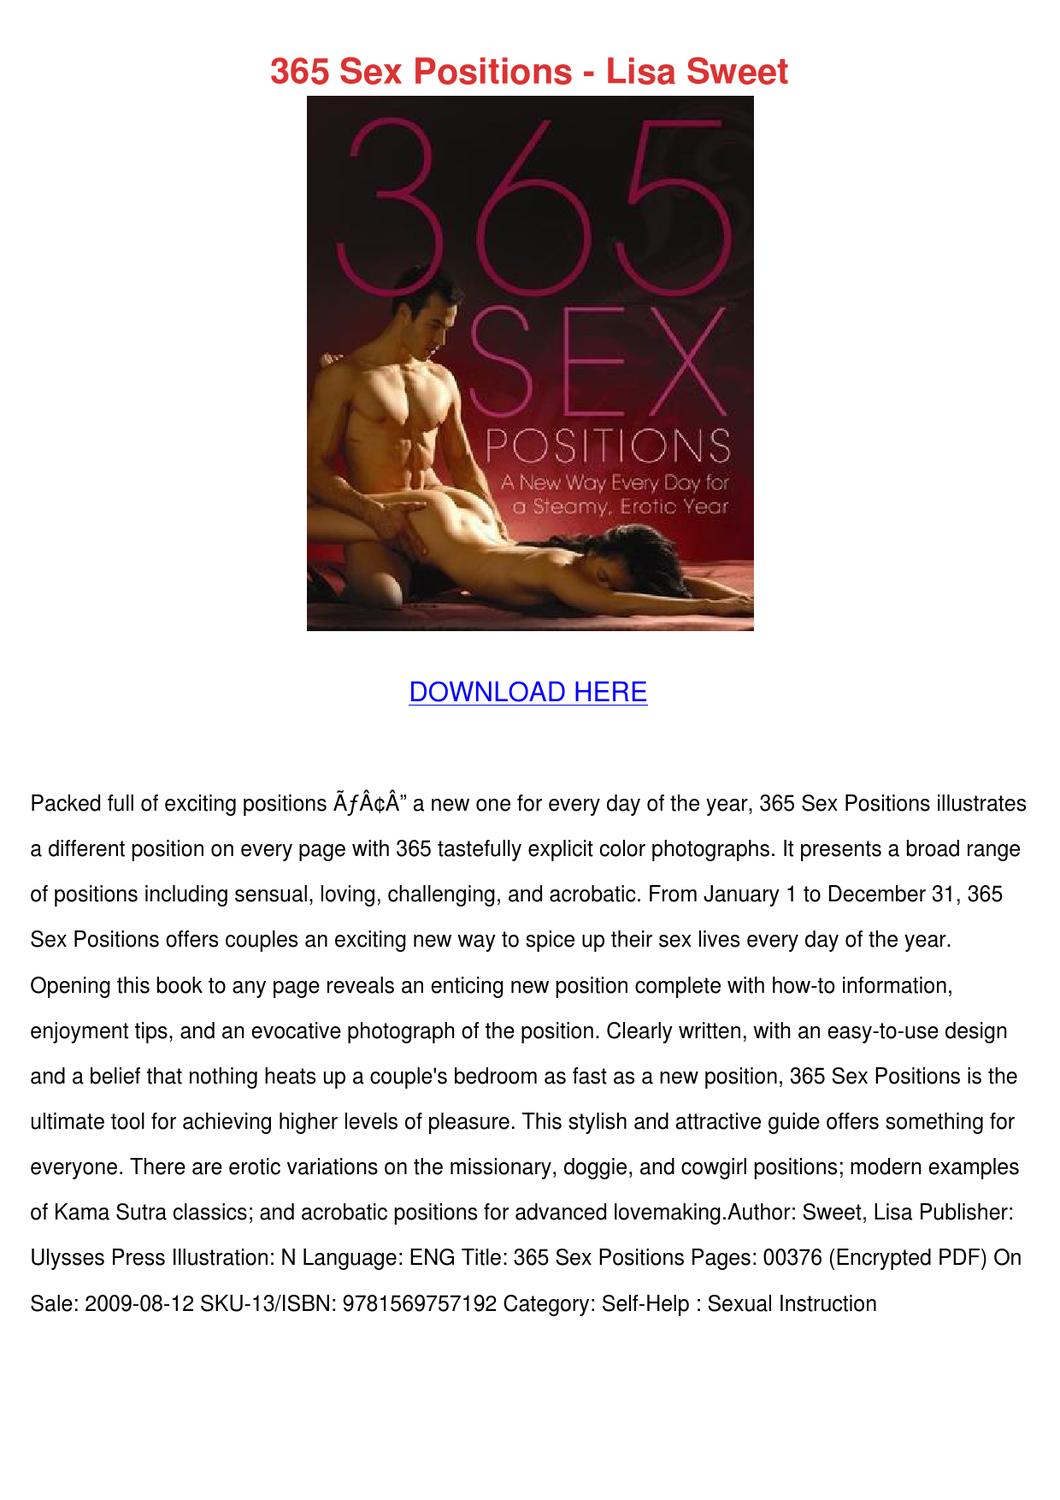 ashley marie chapa recommends different sex poses pdf pic